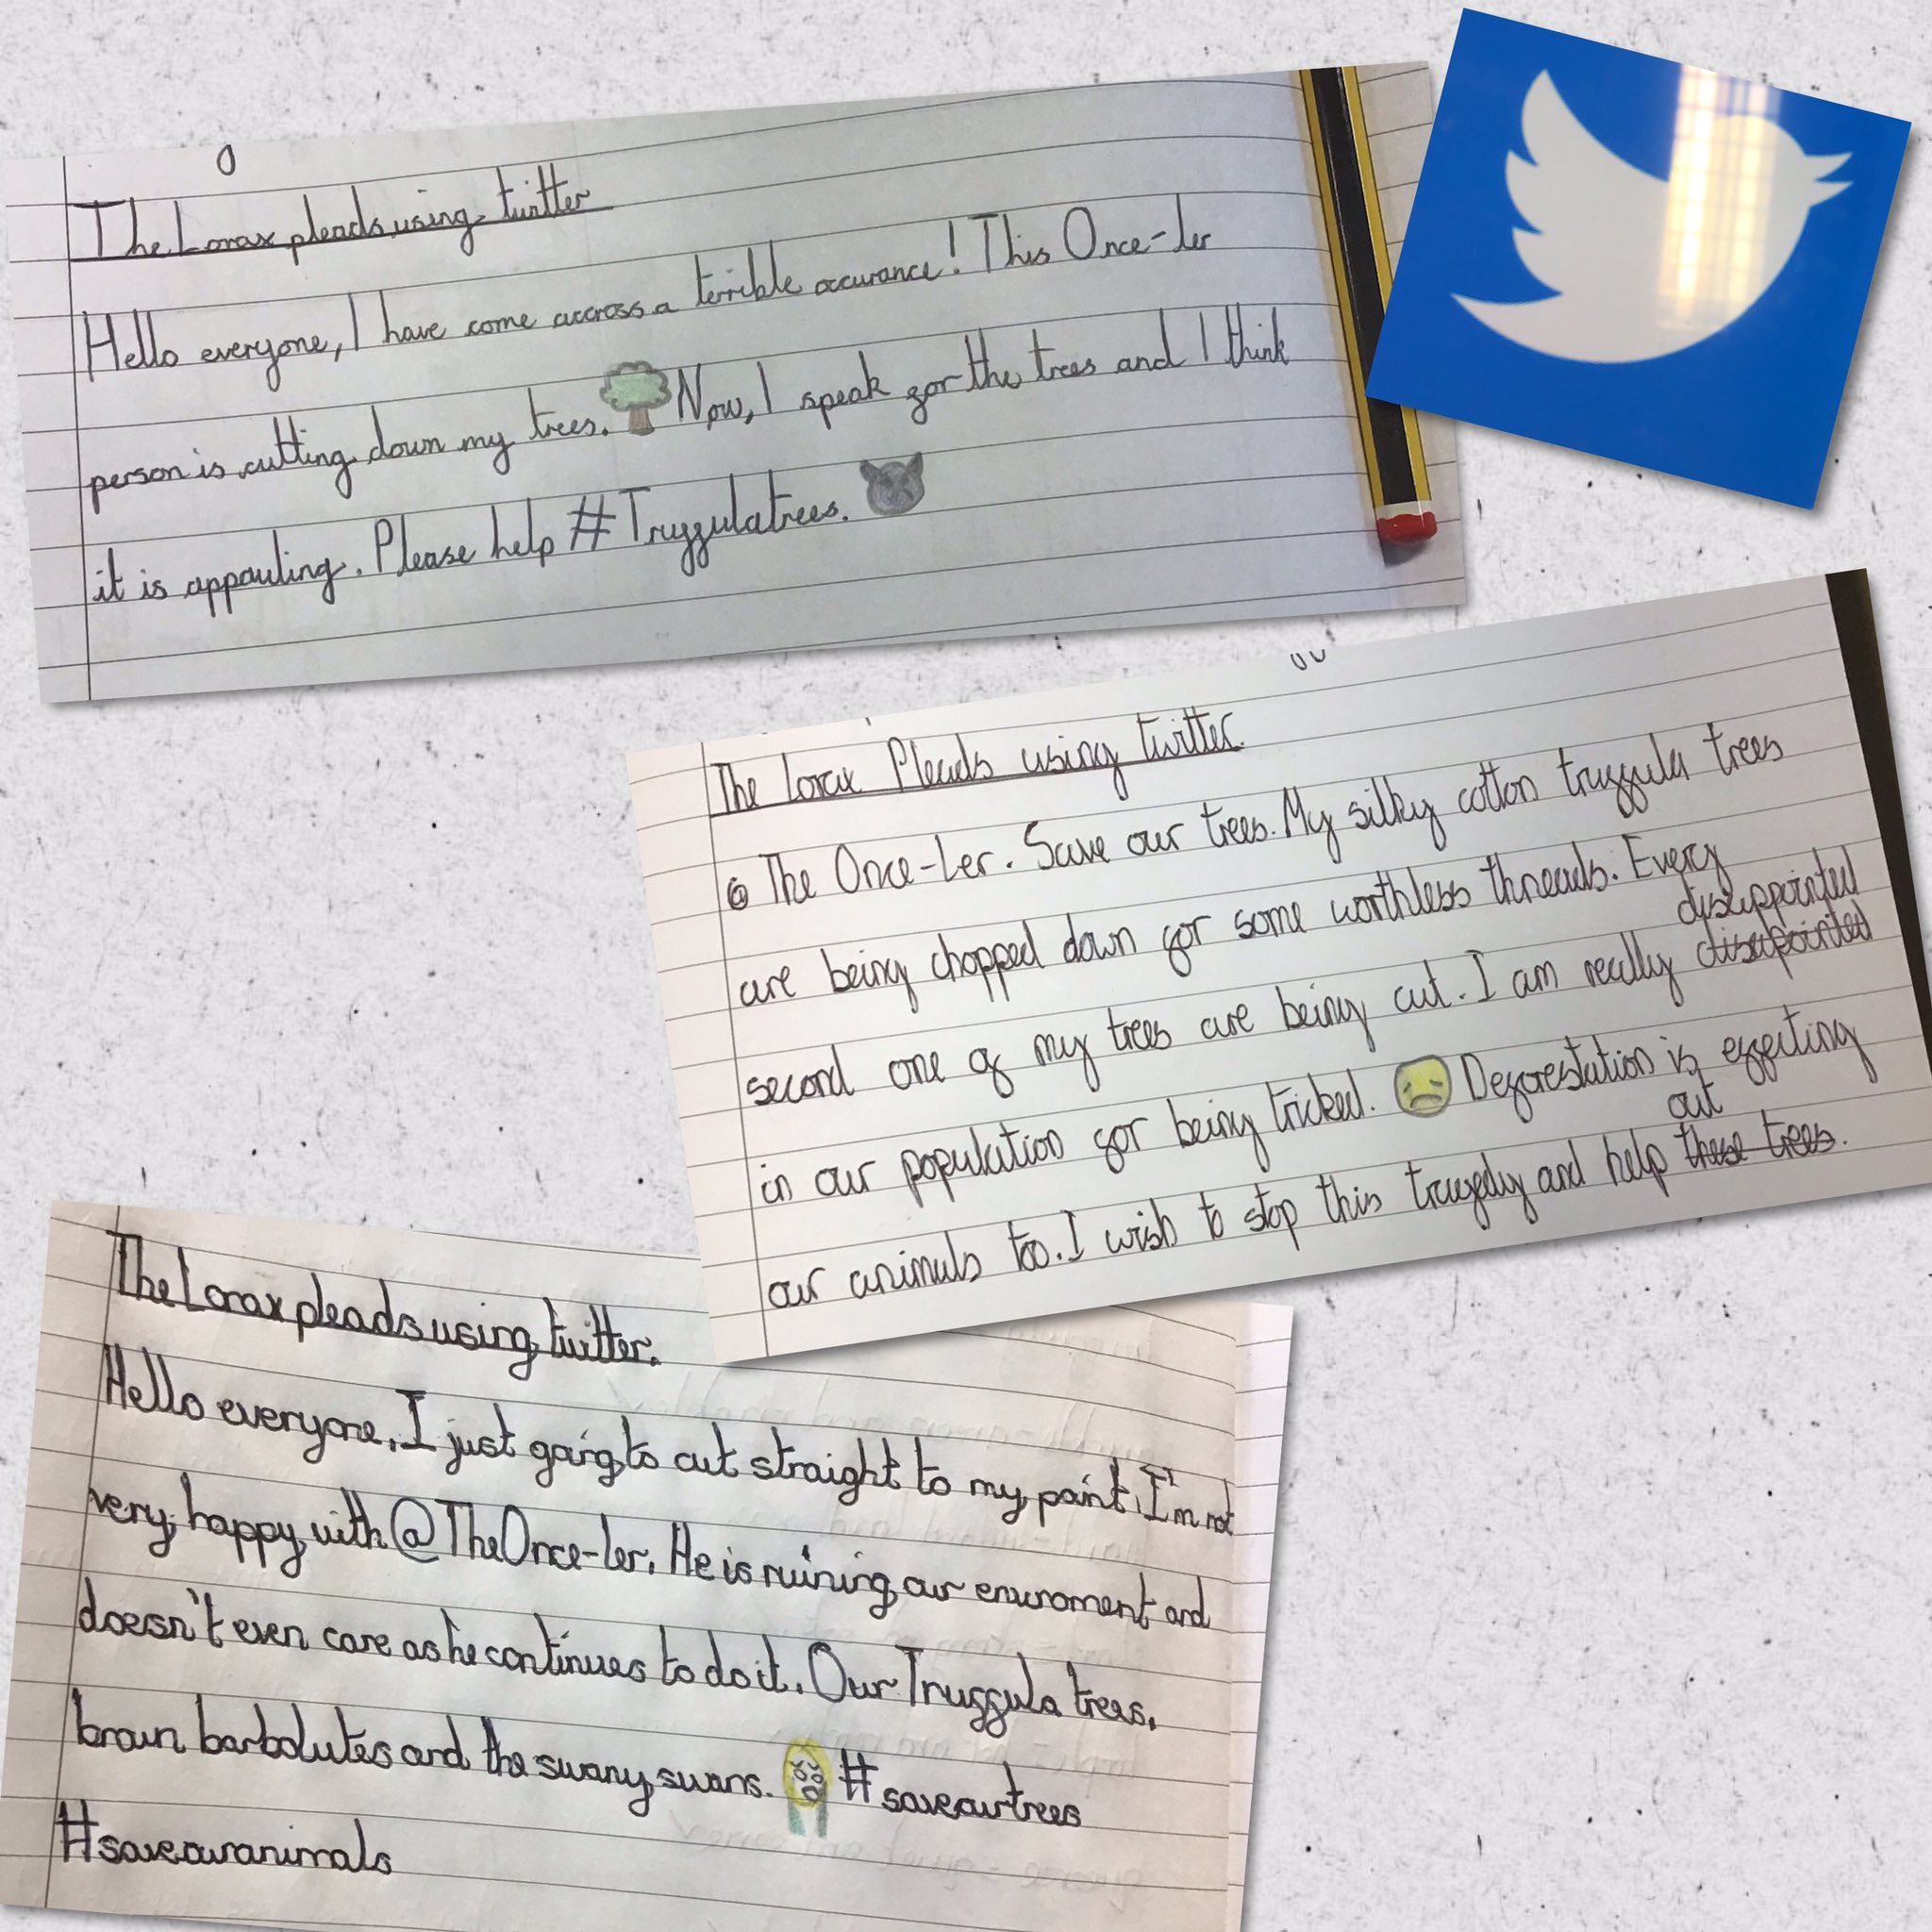 Class10 Stherberts Today We Are Using Social Media To Help The Lorax Save The Trees We Are Having To Think Hard About Which Words We Use To Covey The Meaning In